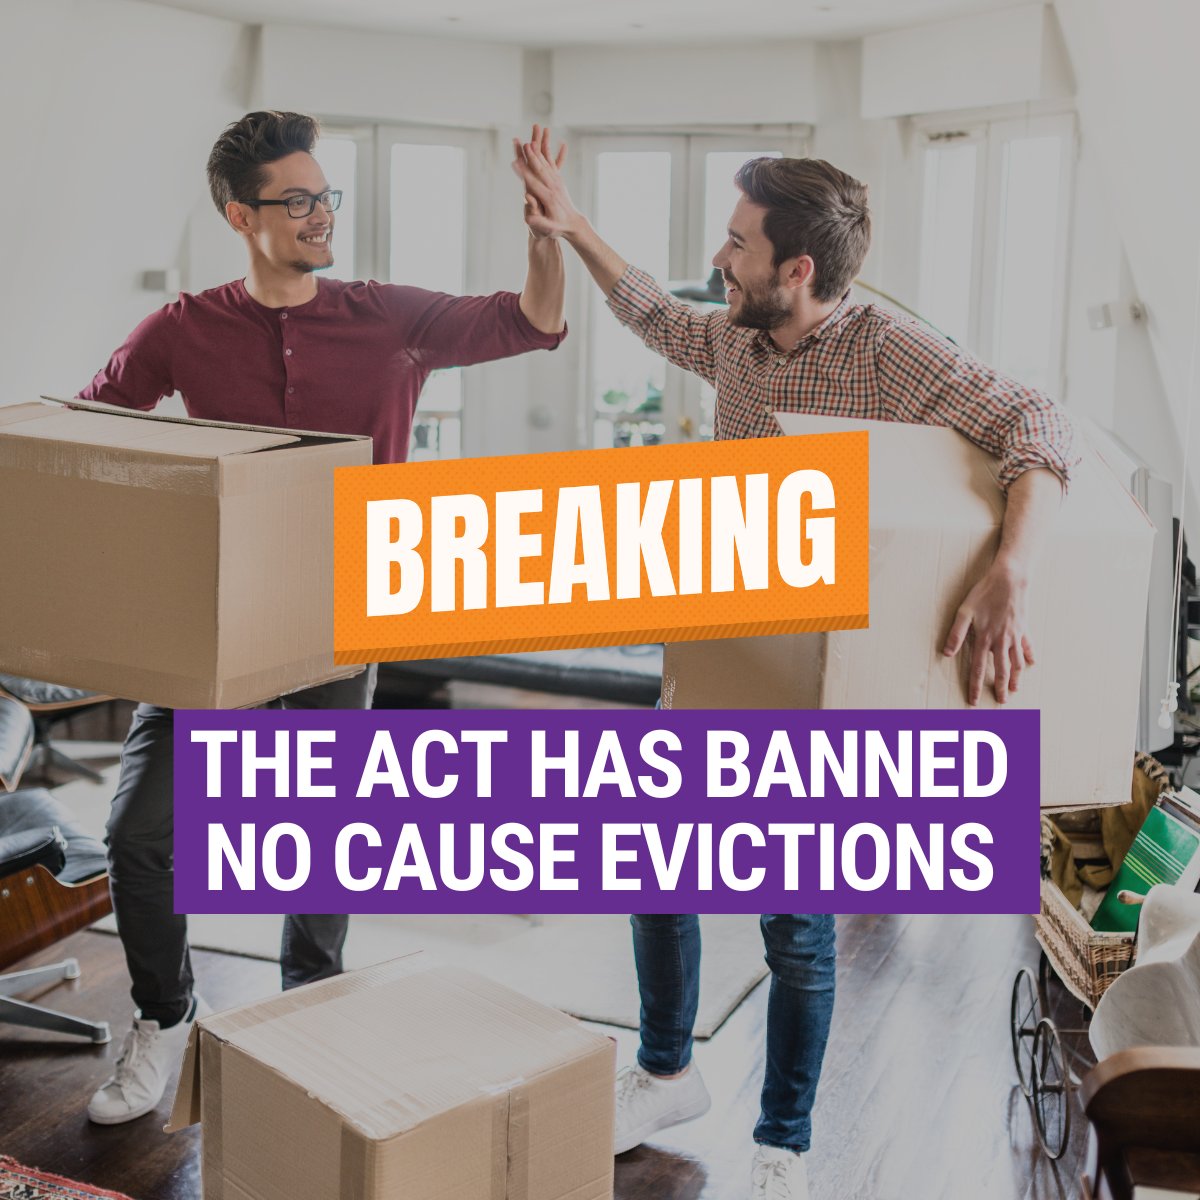 Shane Rattenbury MLA:  Good news for renters!  The ACT is leading the nation today wit…